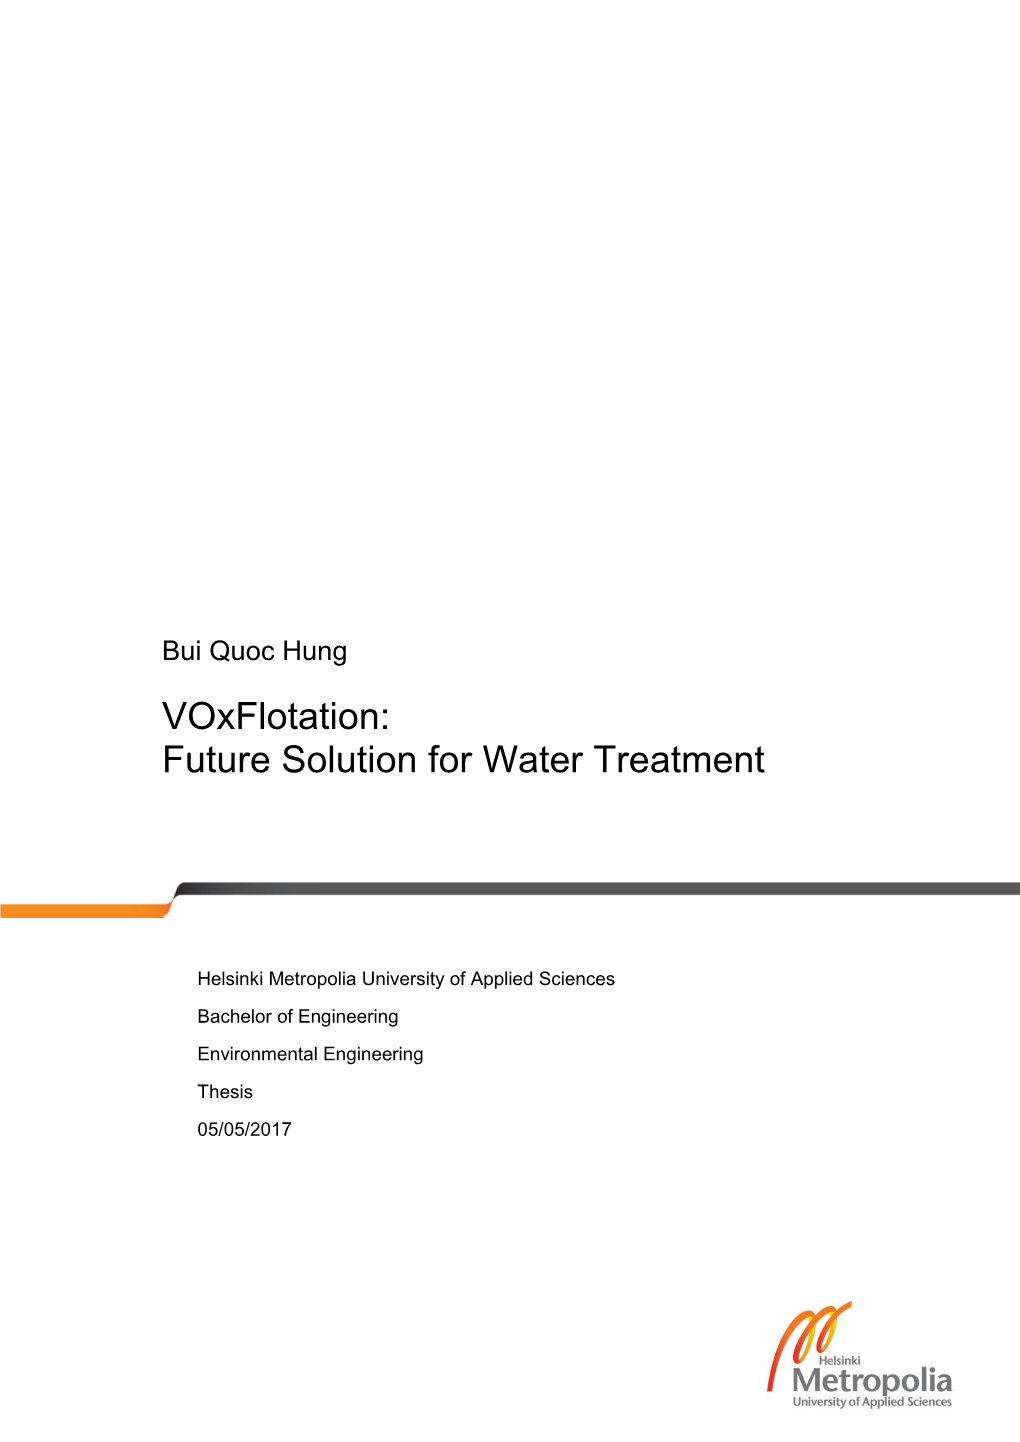 Voxflotation: Future Solution for Water Treatment